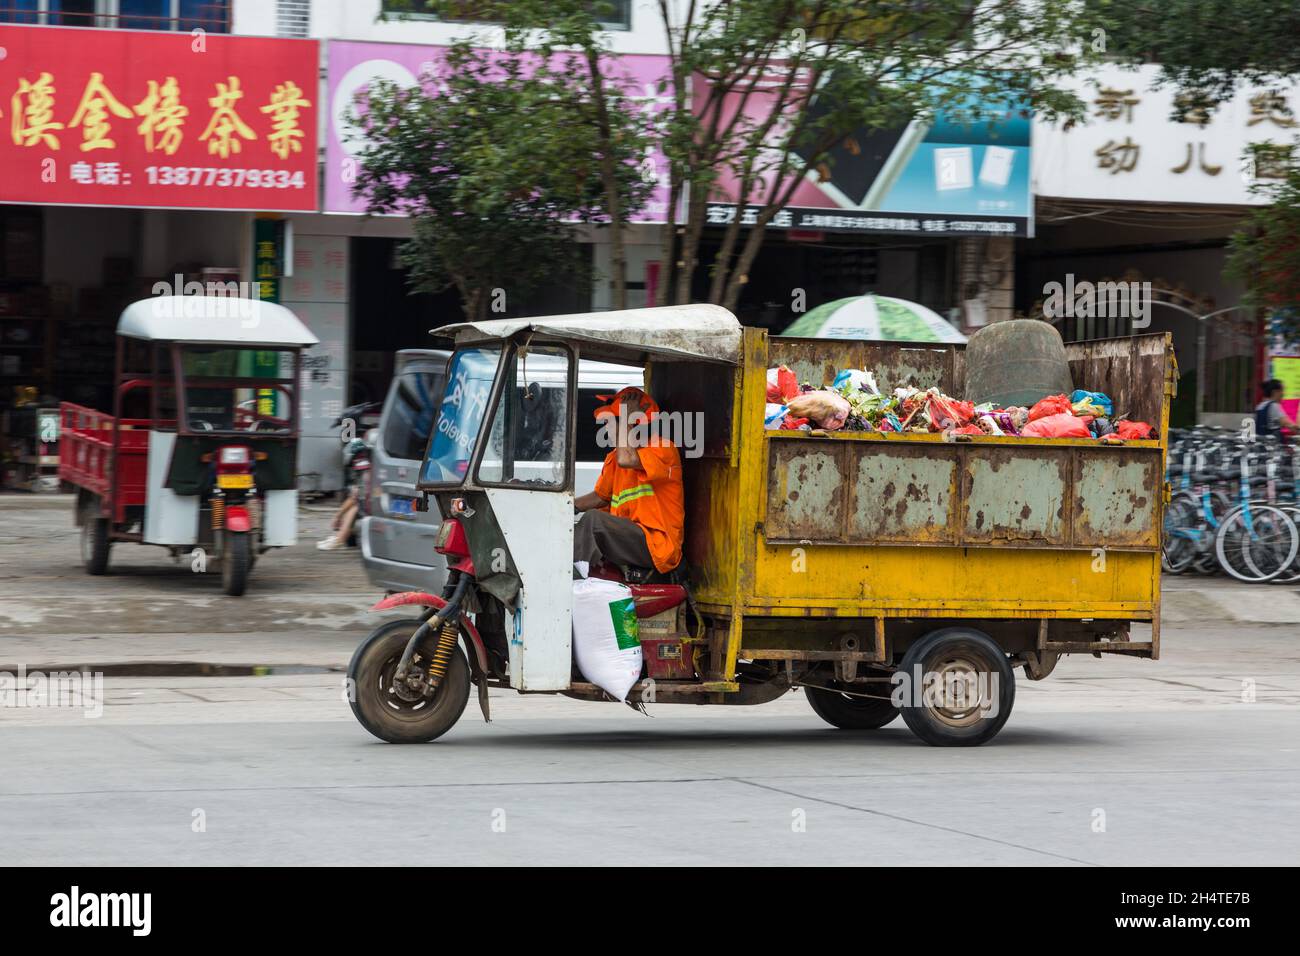 A three-wheeled utility vehicle collecting rubbish driving on the street in Yangshuo, China. Stock Photo